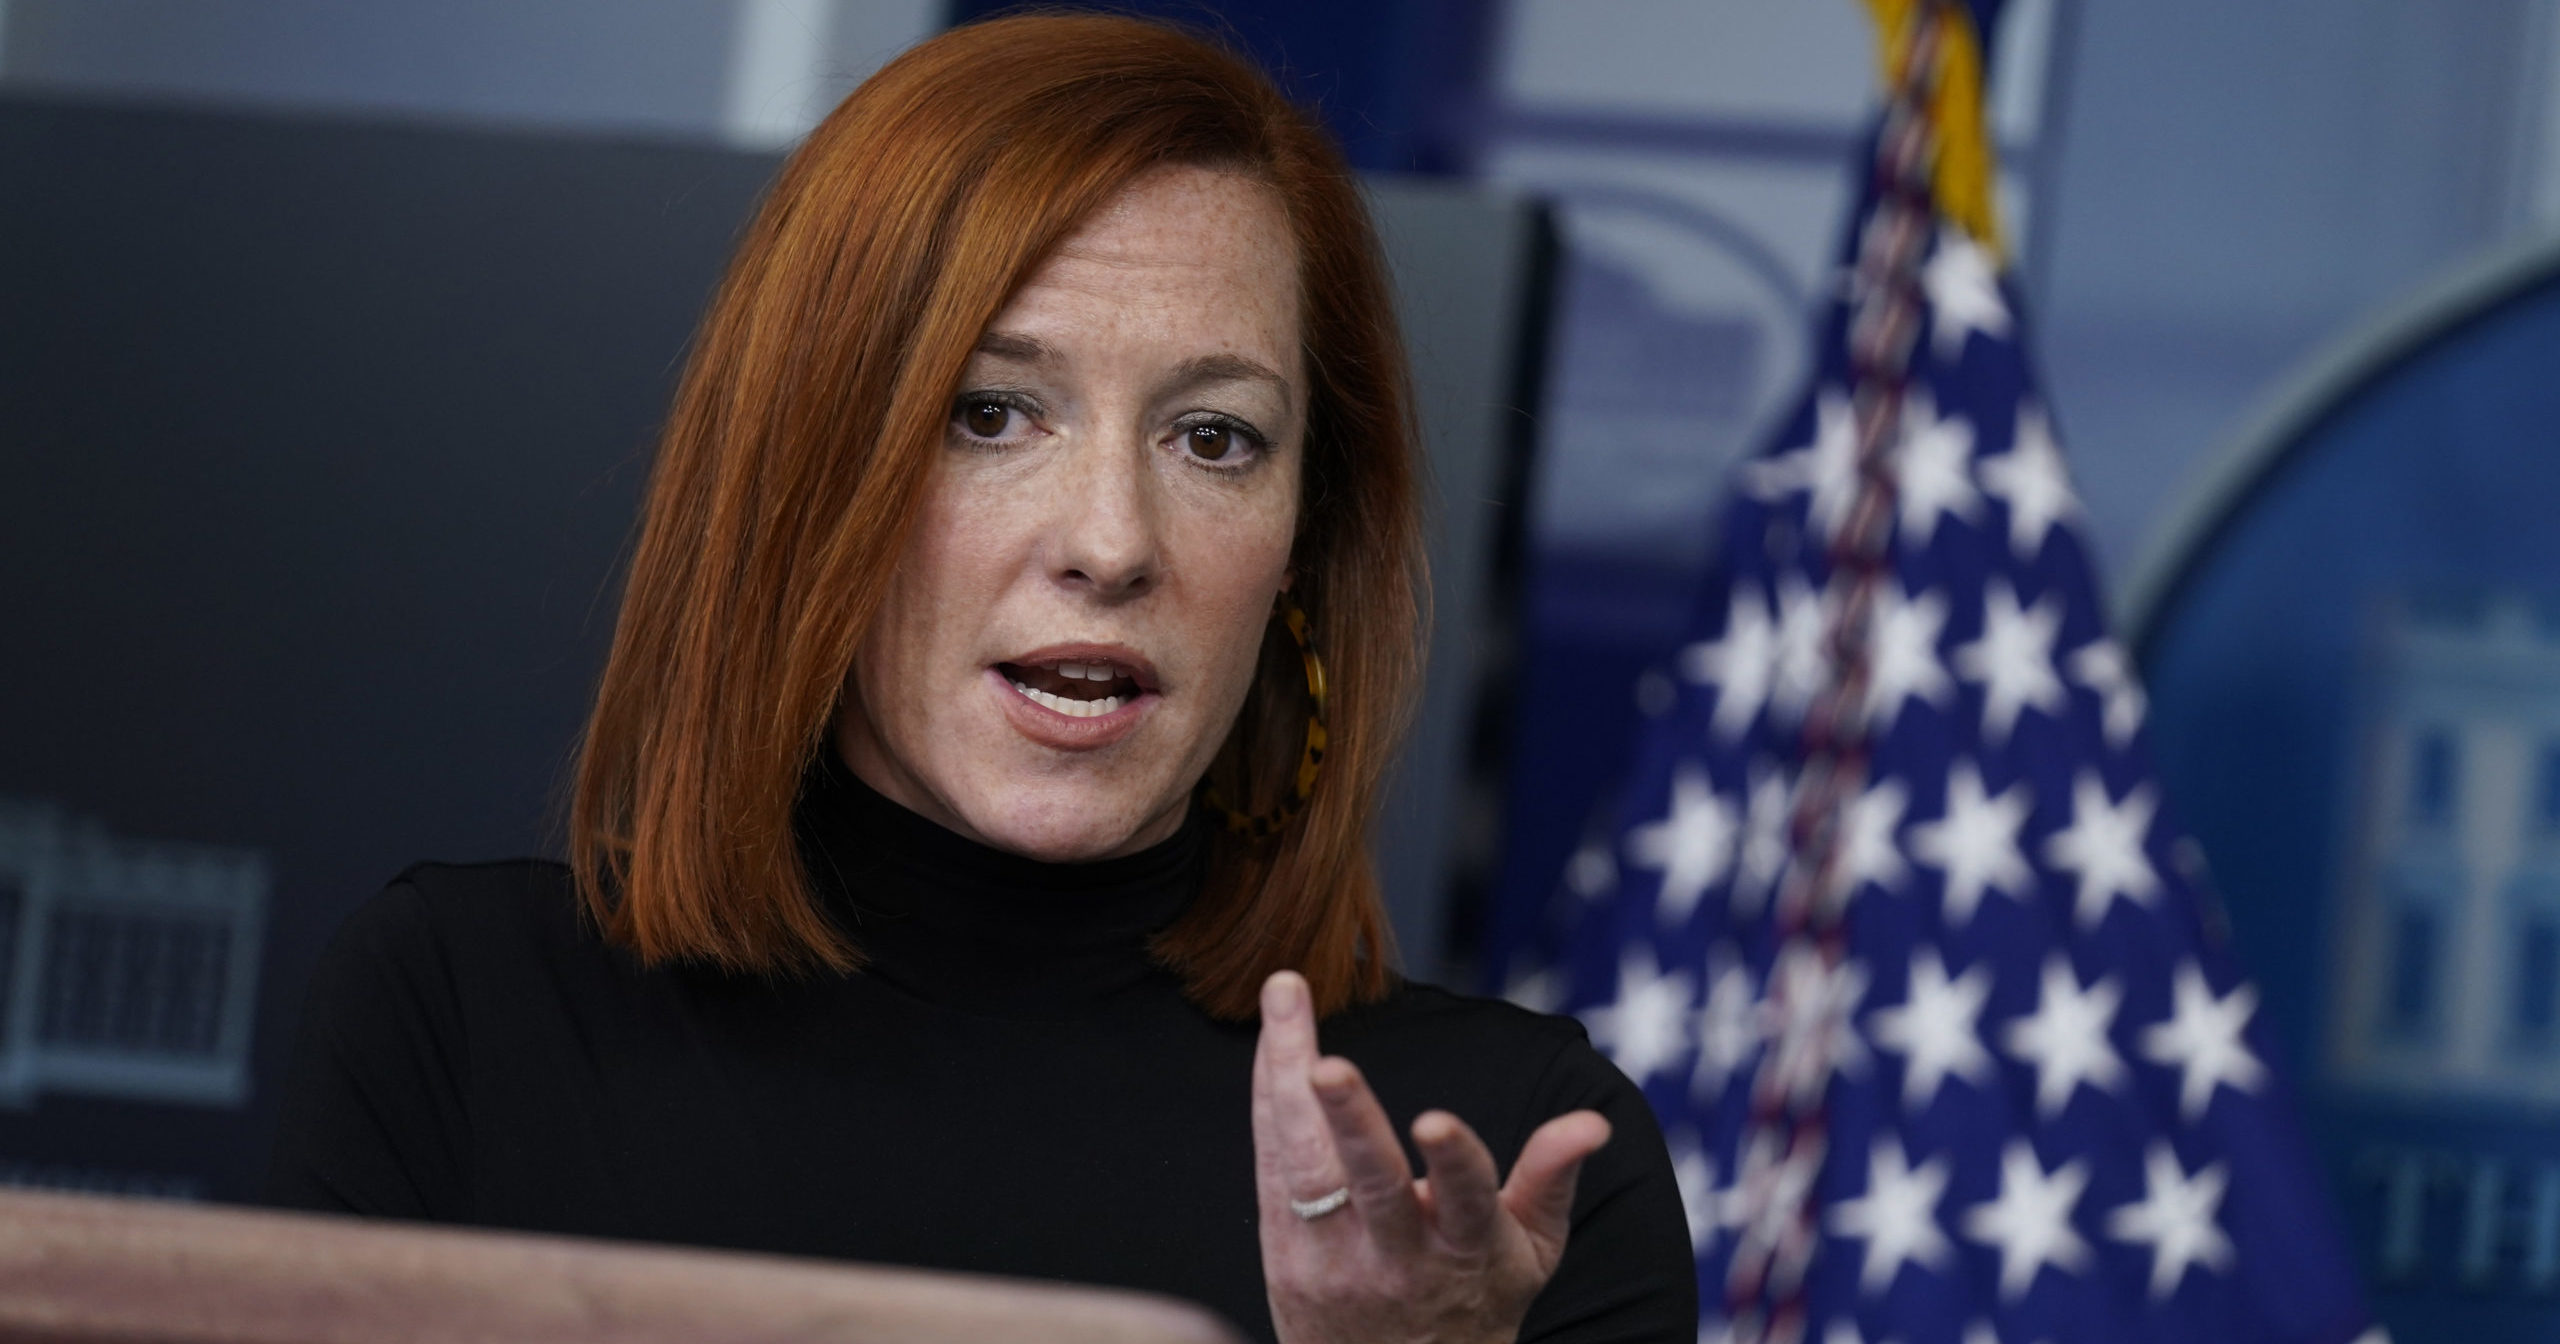 White House press secretary Jen Psaki speaks during a news briefing at the White House on Feb. 3, 2021, in Washington, D.C.